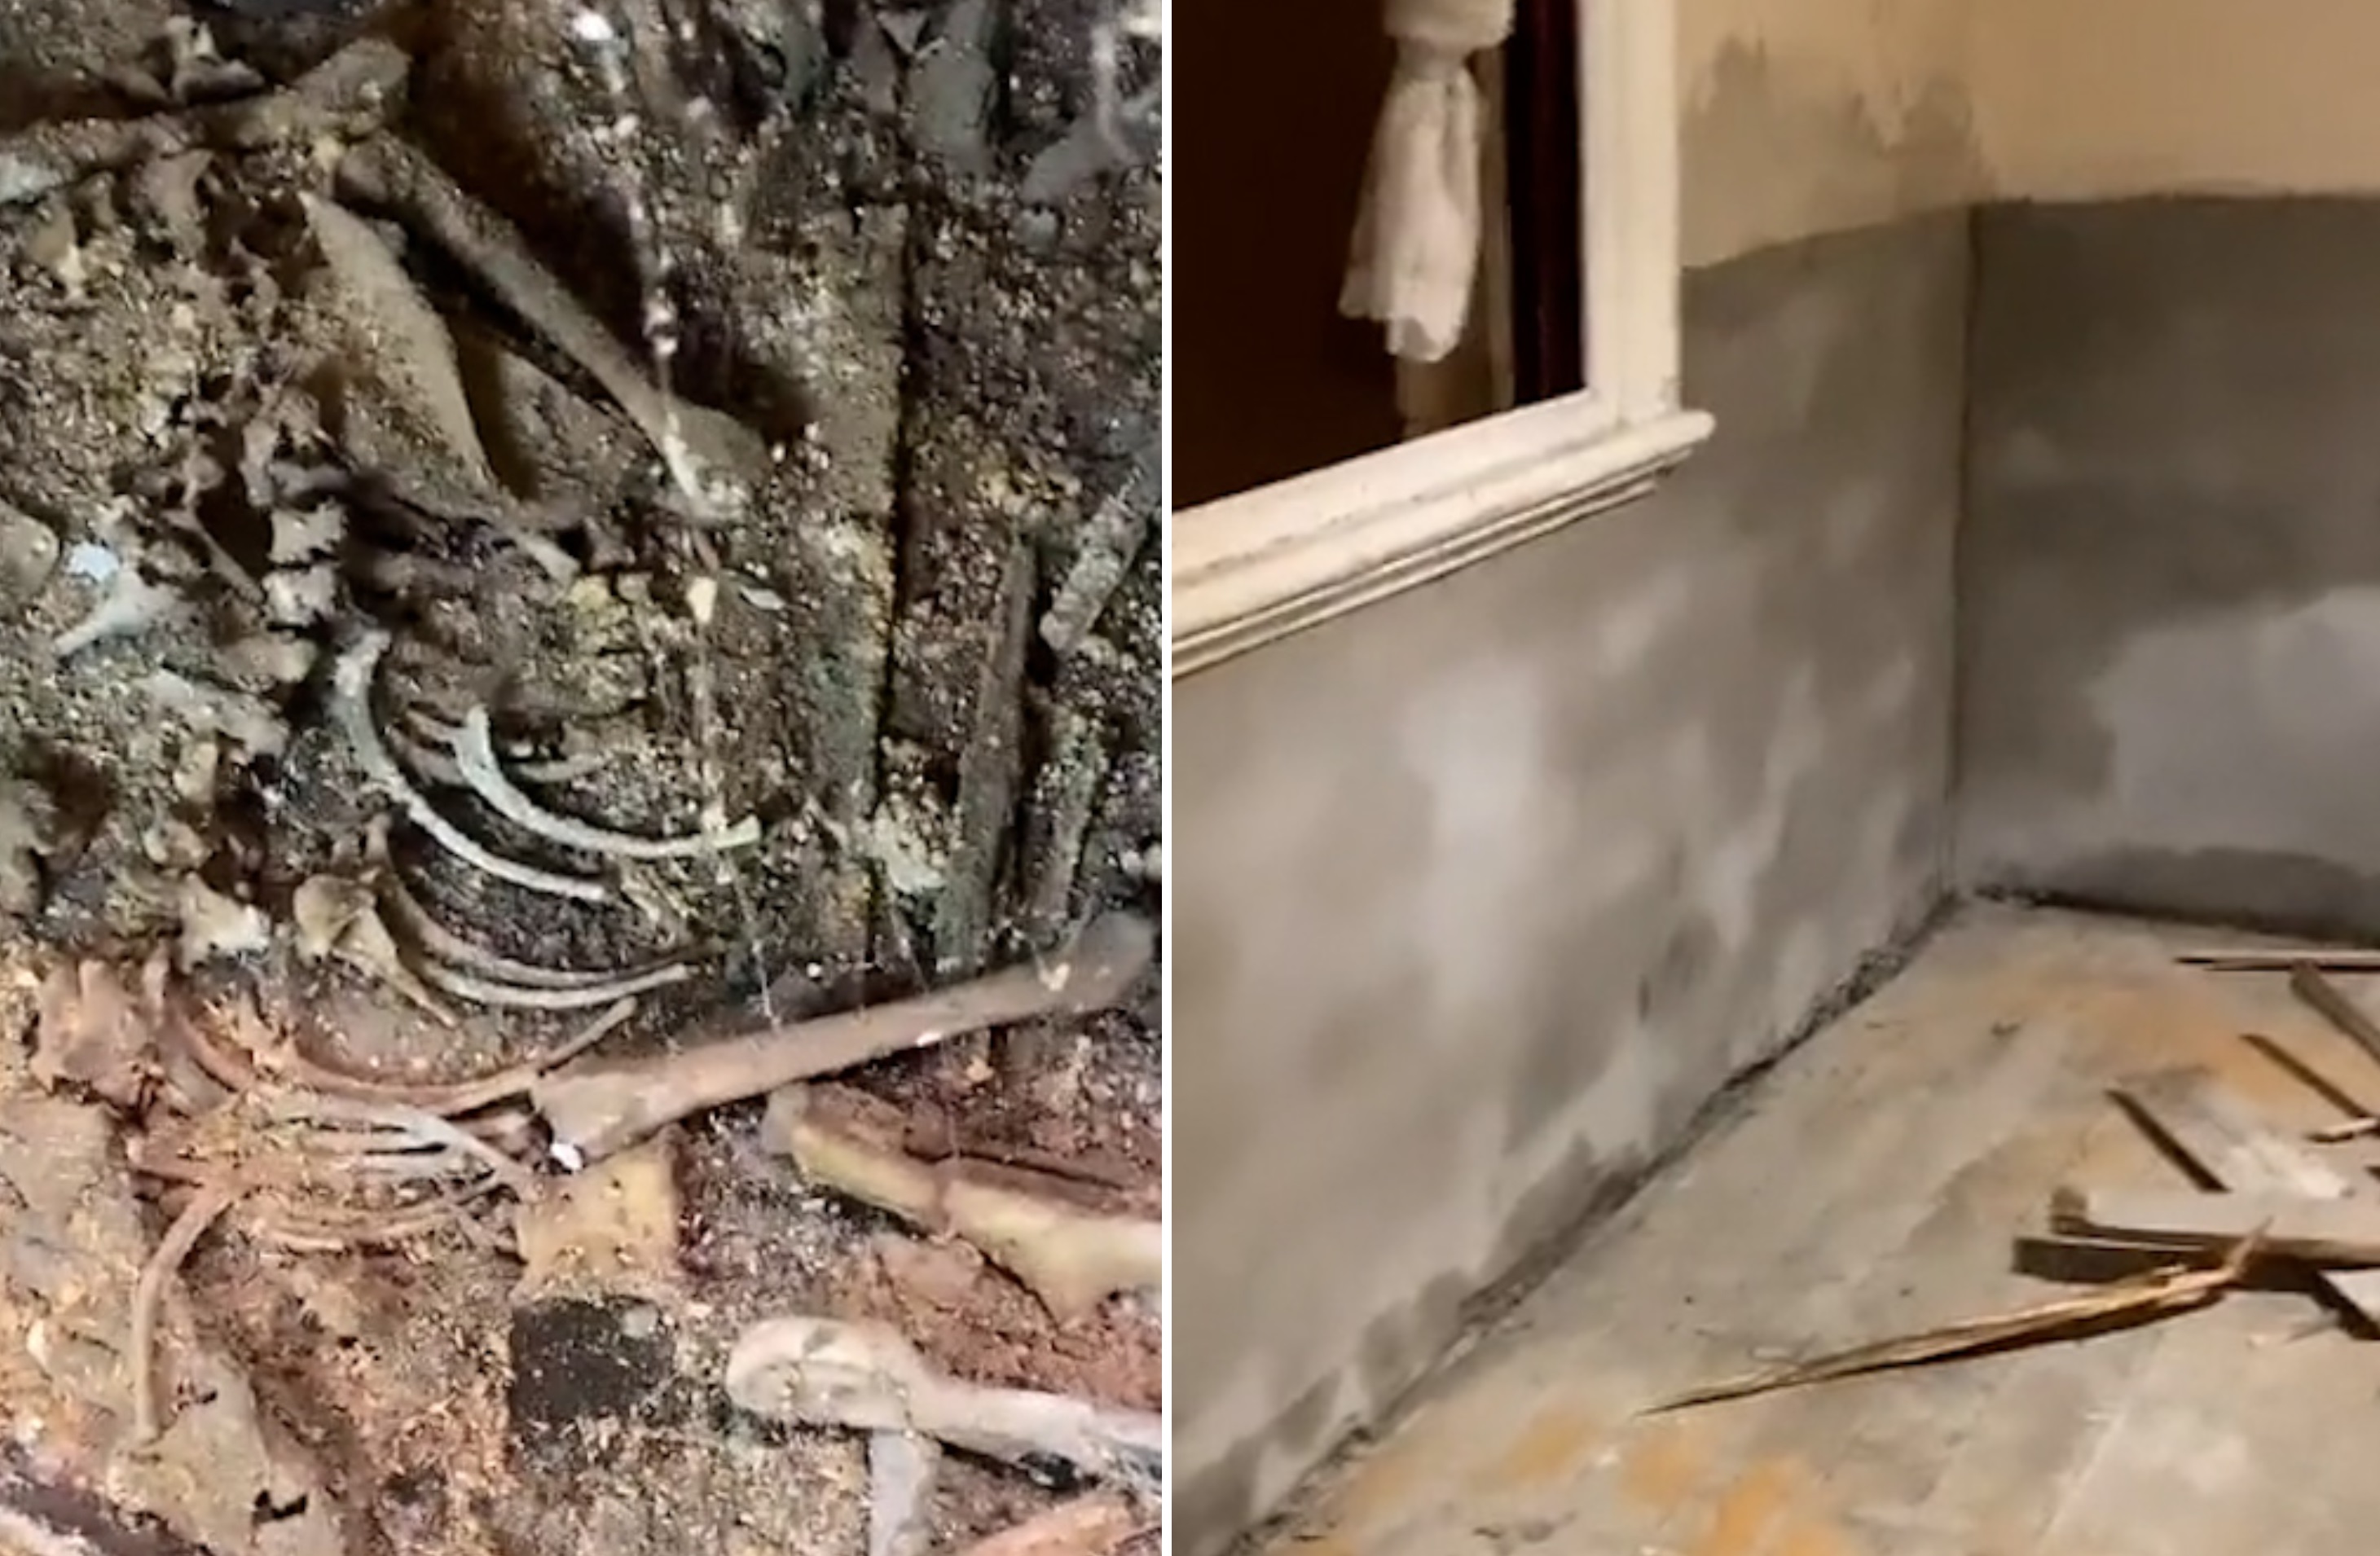 Buyer renovating home pulls up floorboards—calls police over what she finds